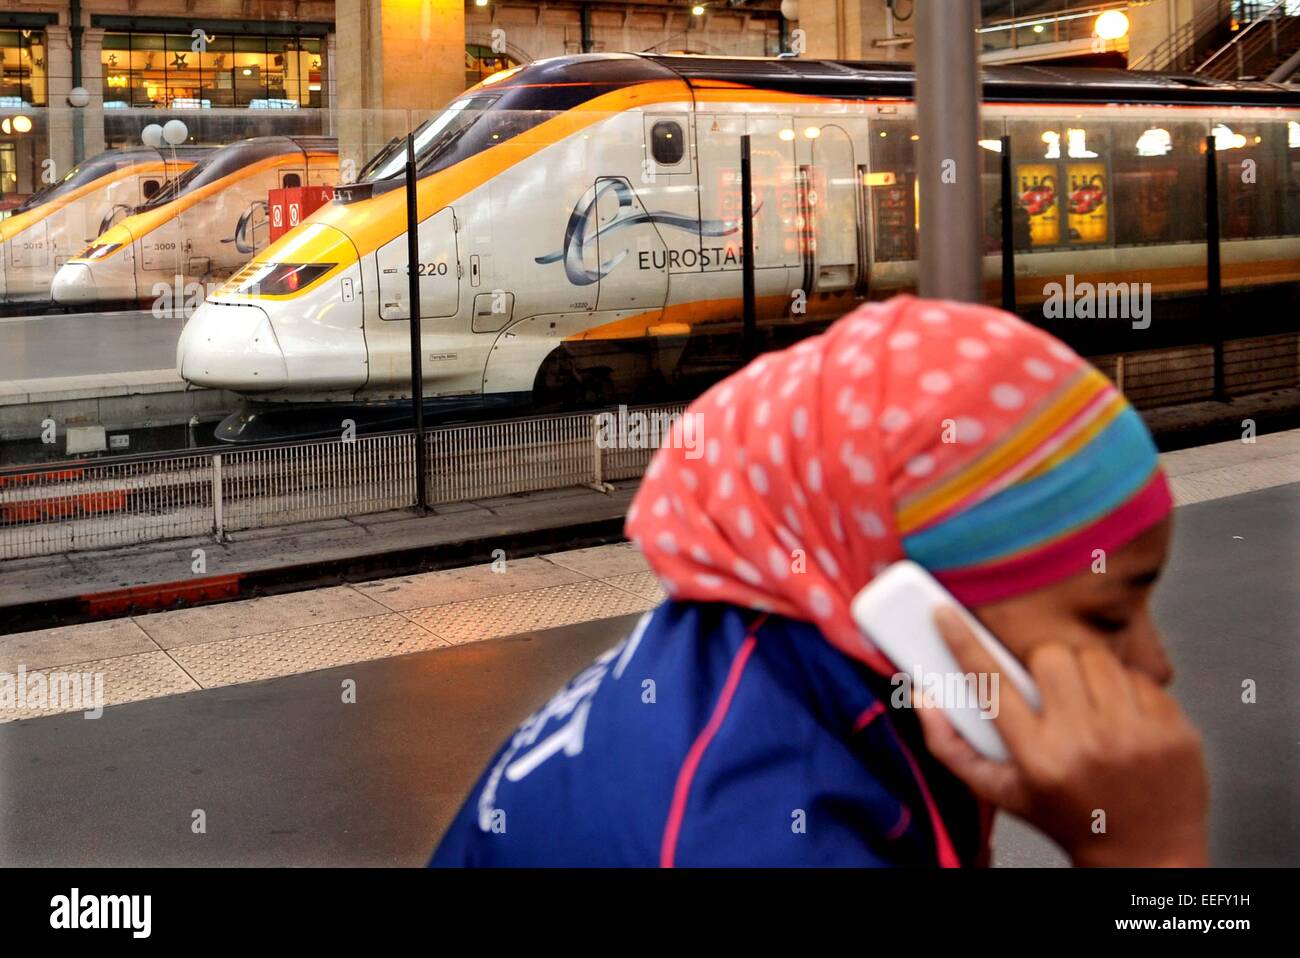 Paris, France. 17th Jan, 2015. A passenger makes a phone call besides a Eurostar train at the Gare du Nord train station in Paris, France, Jan. 17, 2015. All services of Eurostar were suspended Saturday due to smoke detection in the Channel Tunnel, Eurostar announced Saturday. All trains were returning to original stations as the Channel Tunnel linking Britain and France was closed until further notice, Eurostar's customer care team said on its Twitter account. Credit:  Chen Xiaowei/Xinhua/Alamy Live News Stock Photo